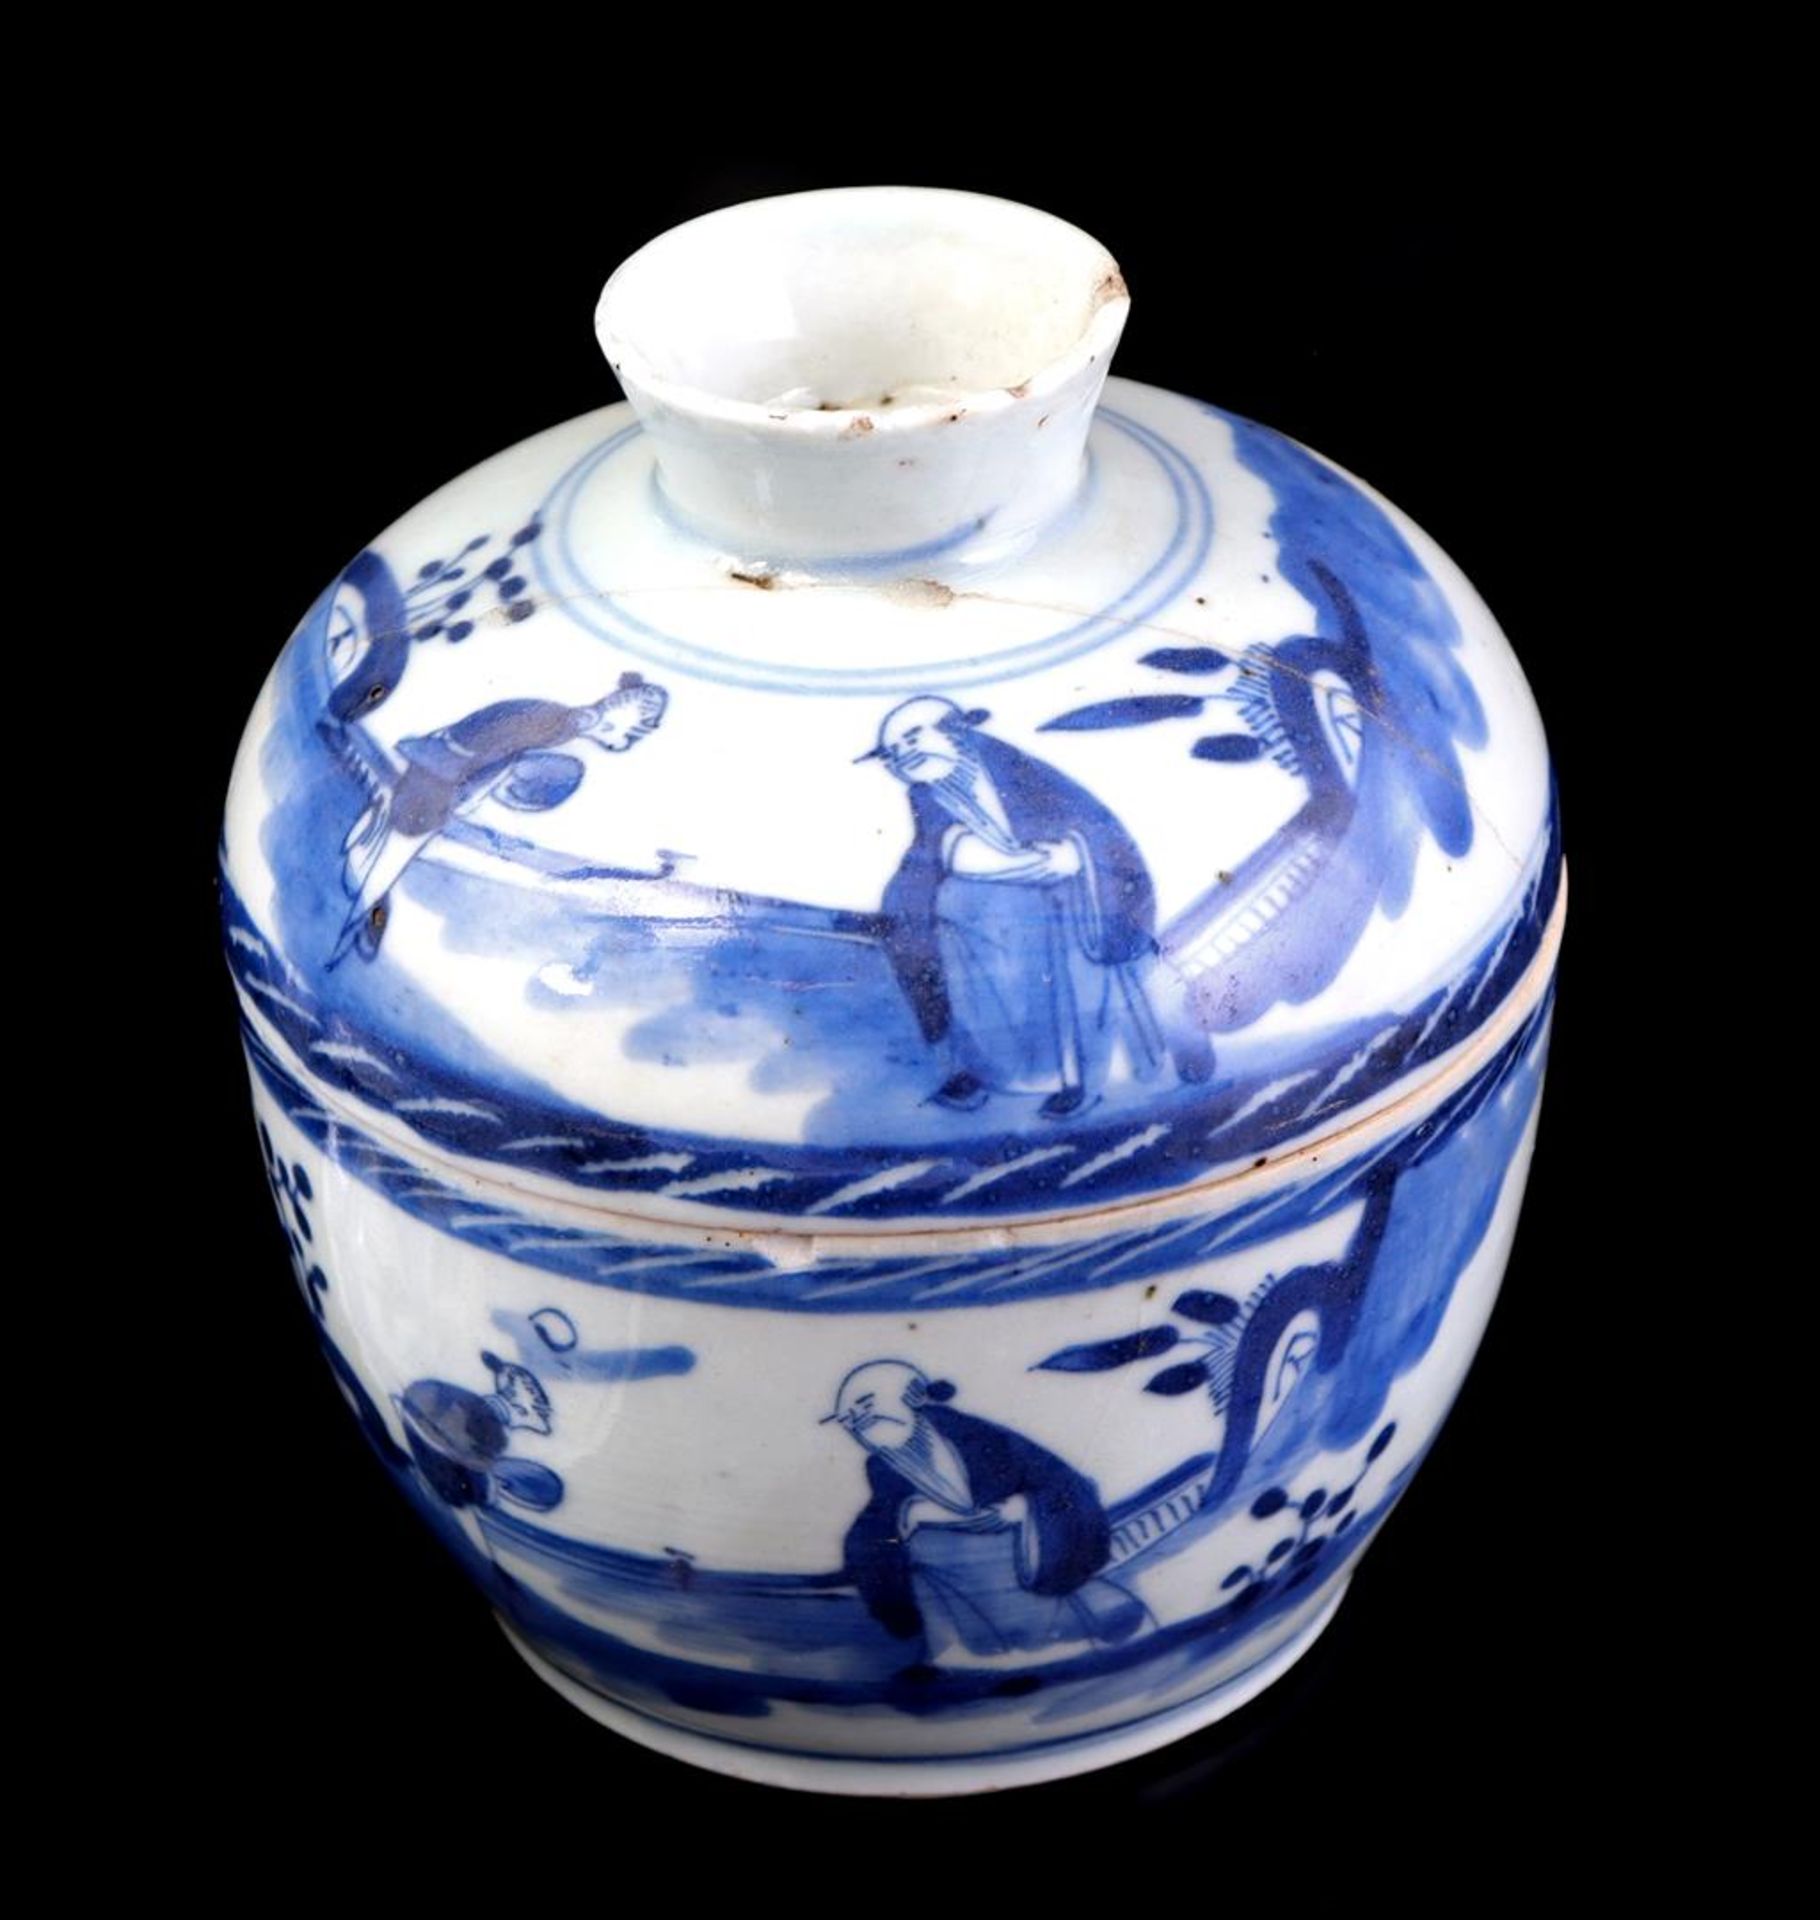 Lot of Chinese porcelain - Image 4 of 4